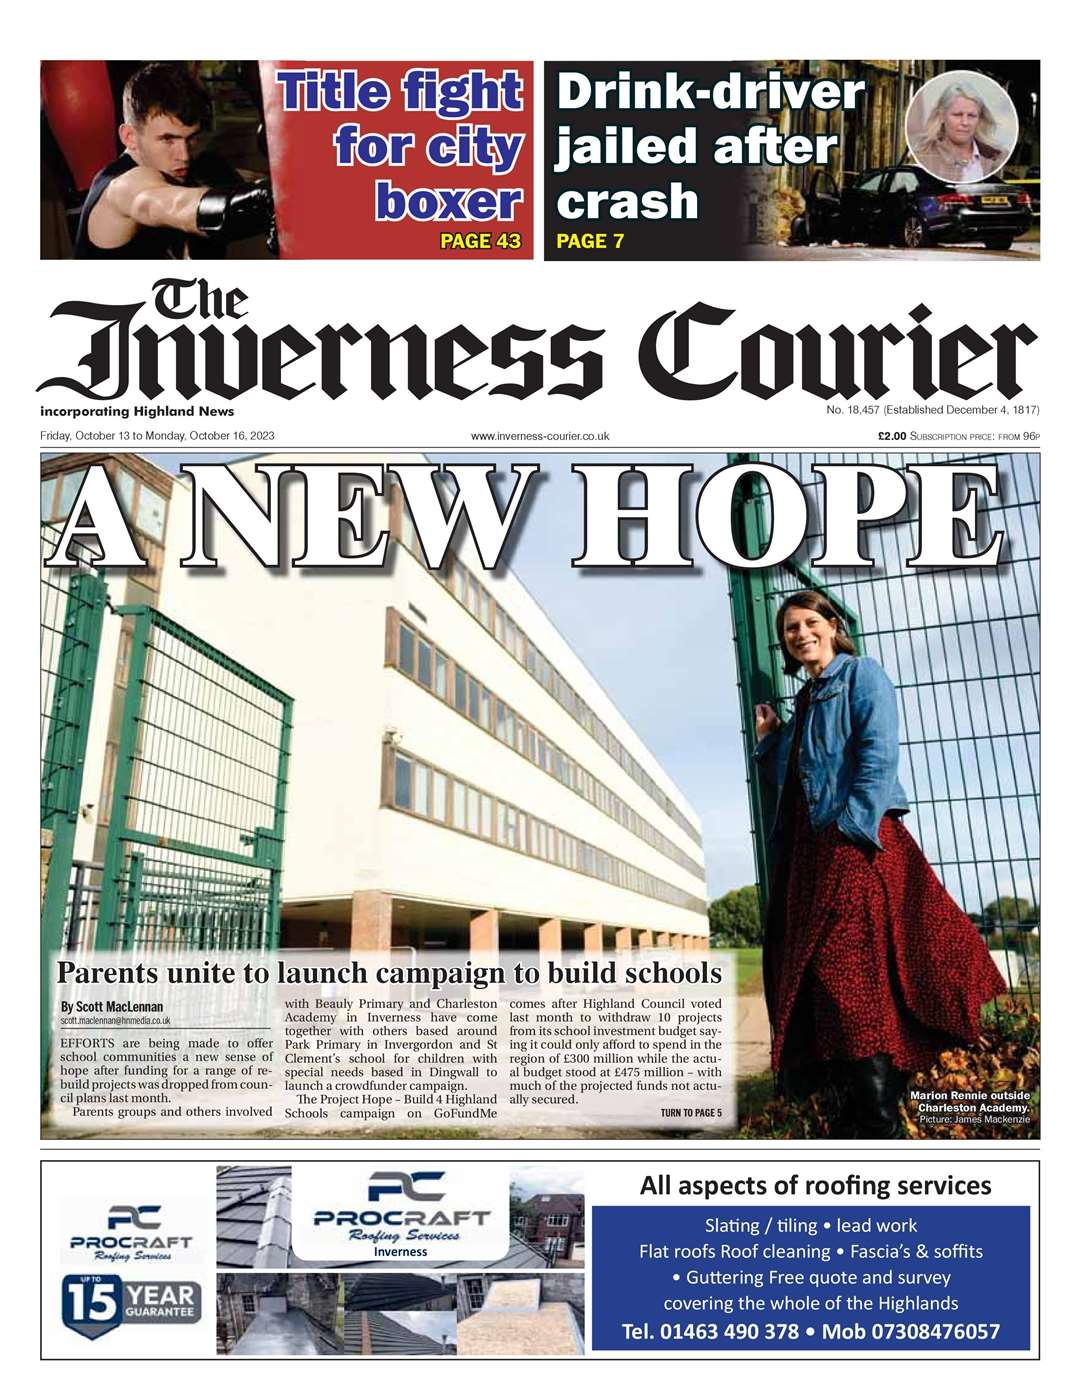 The Inverness Courier, October 13, front page.